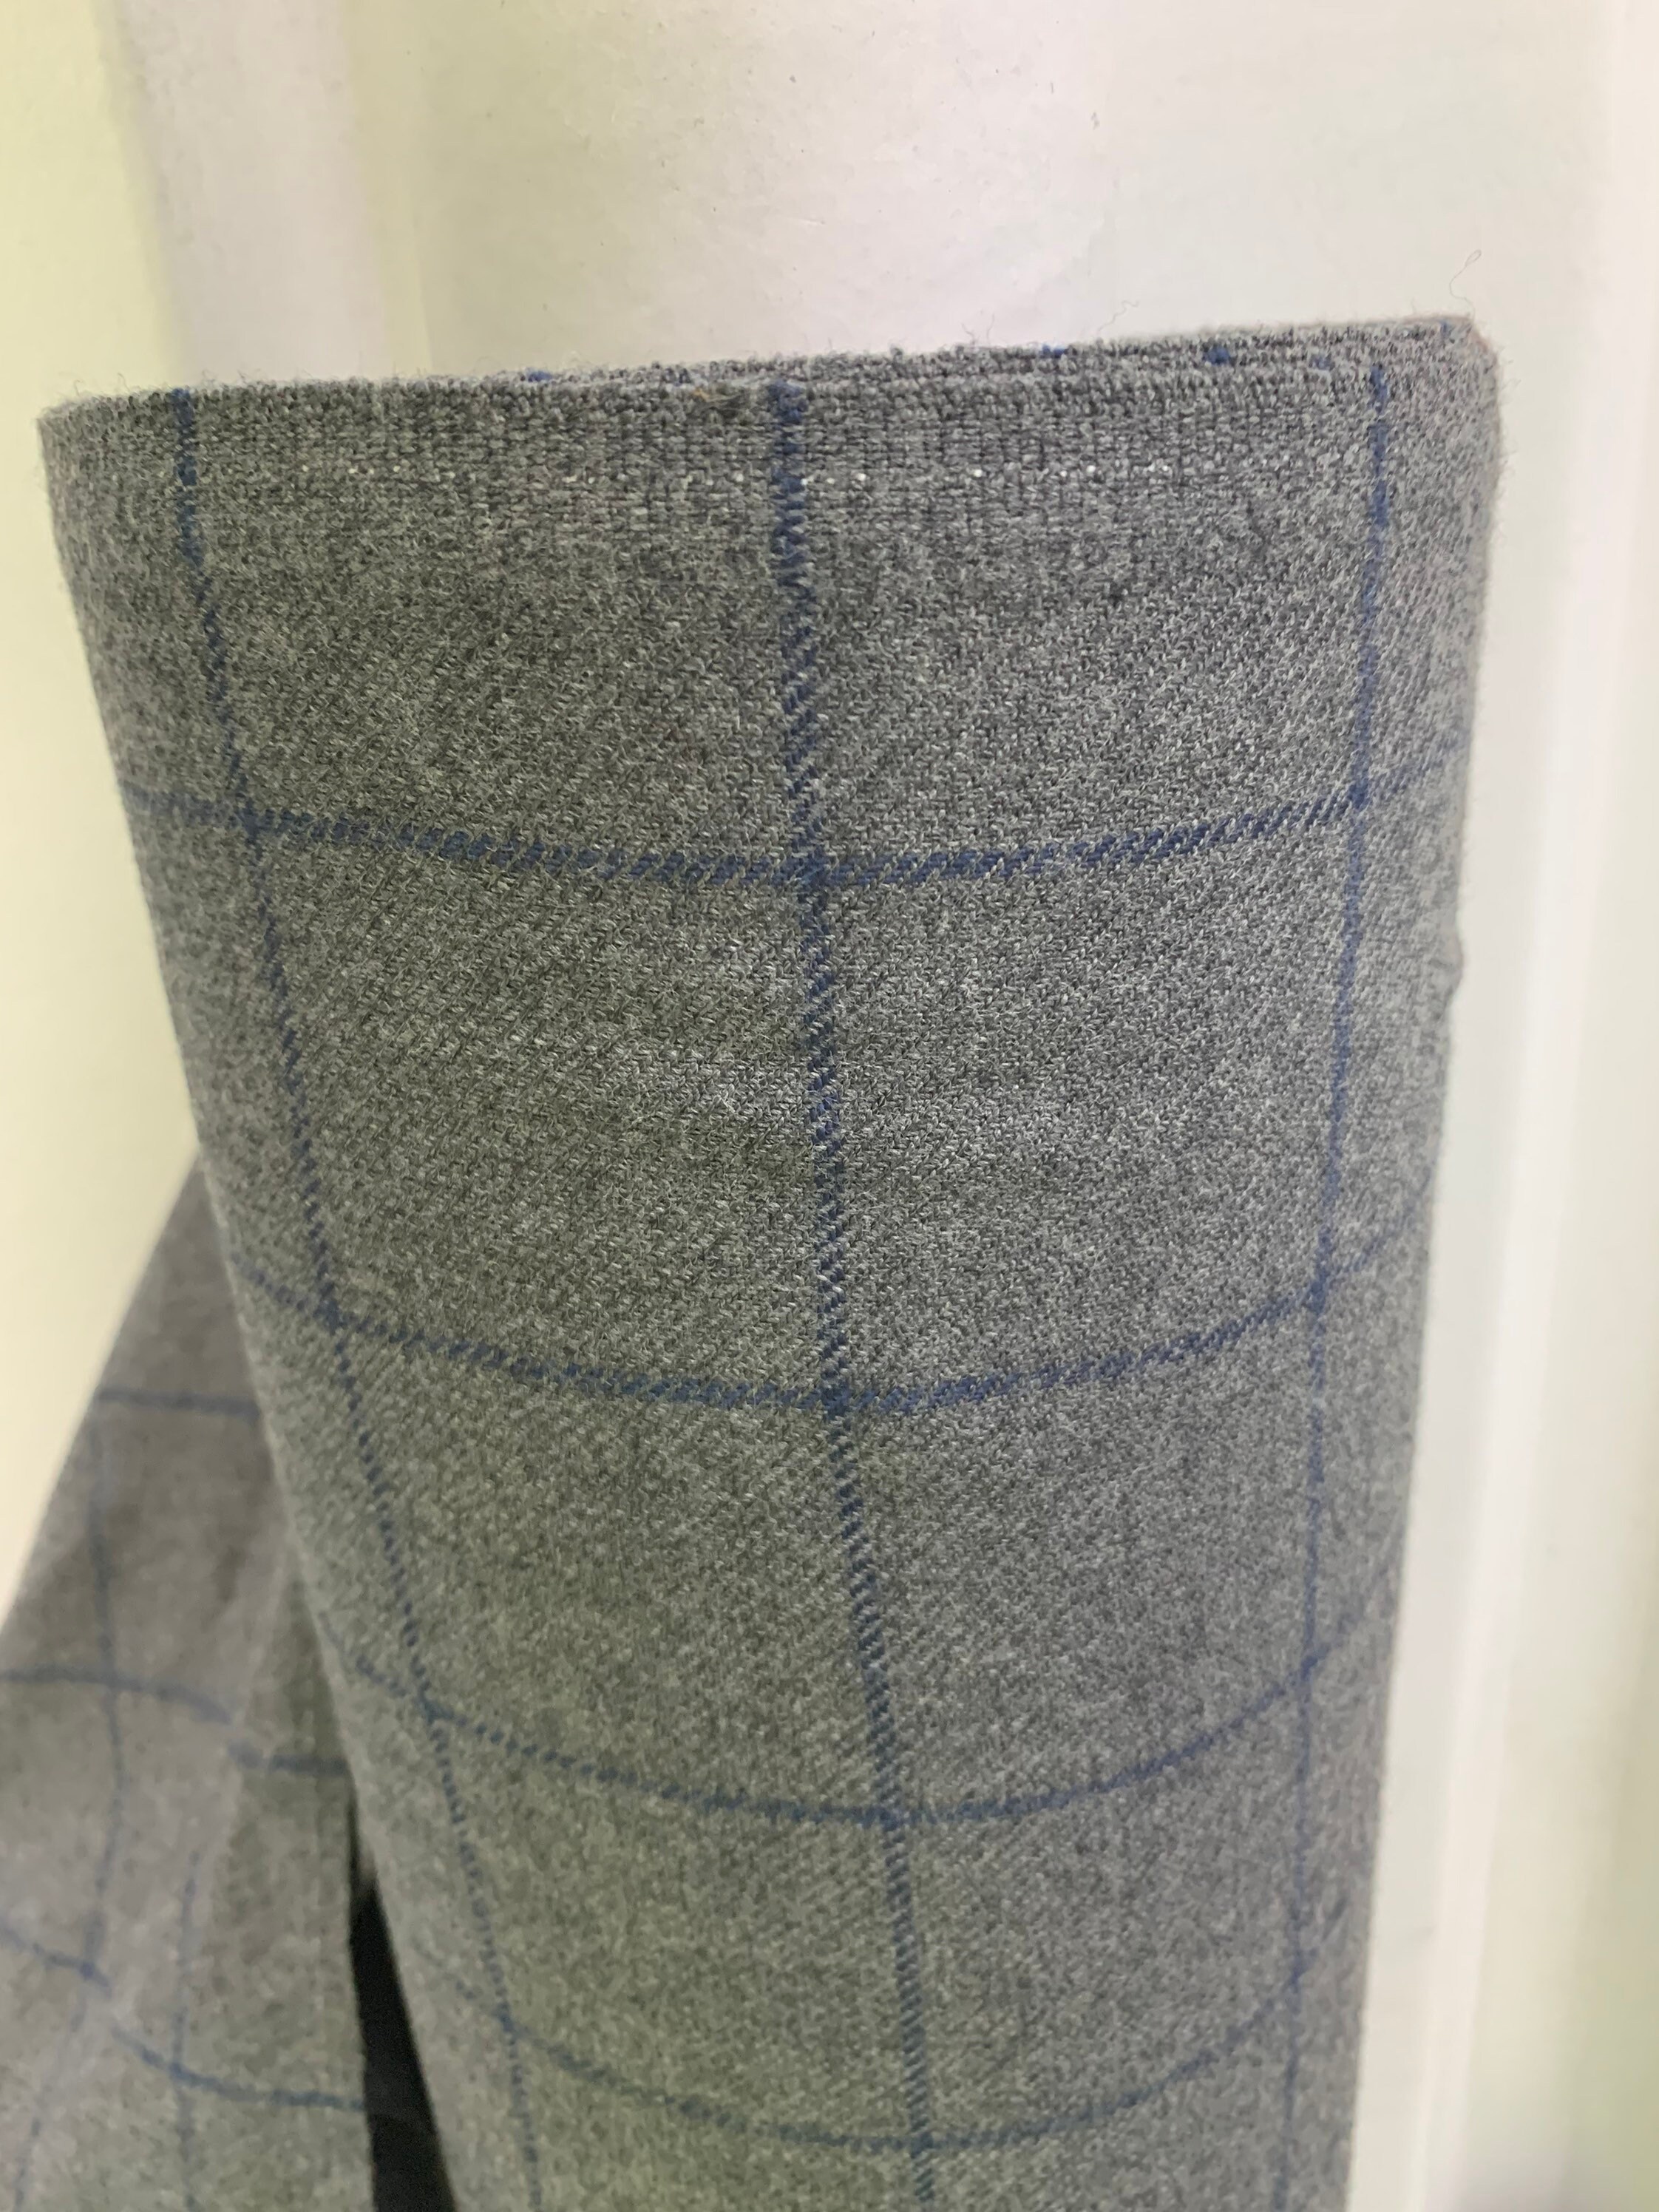 Charcoal Grey With Blue Check Plaid 100% Wool  Fabric Sold Per Metre Made In Huddersfield England